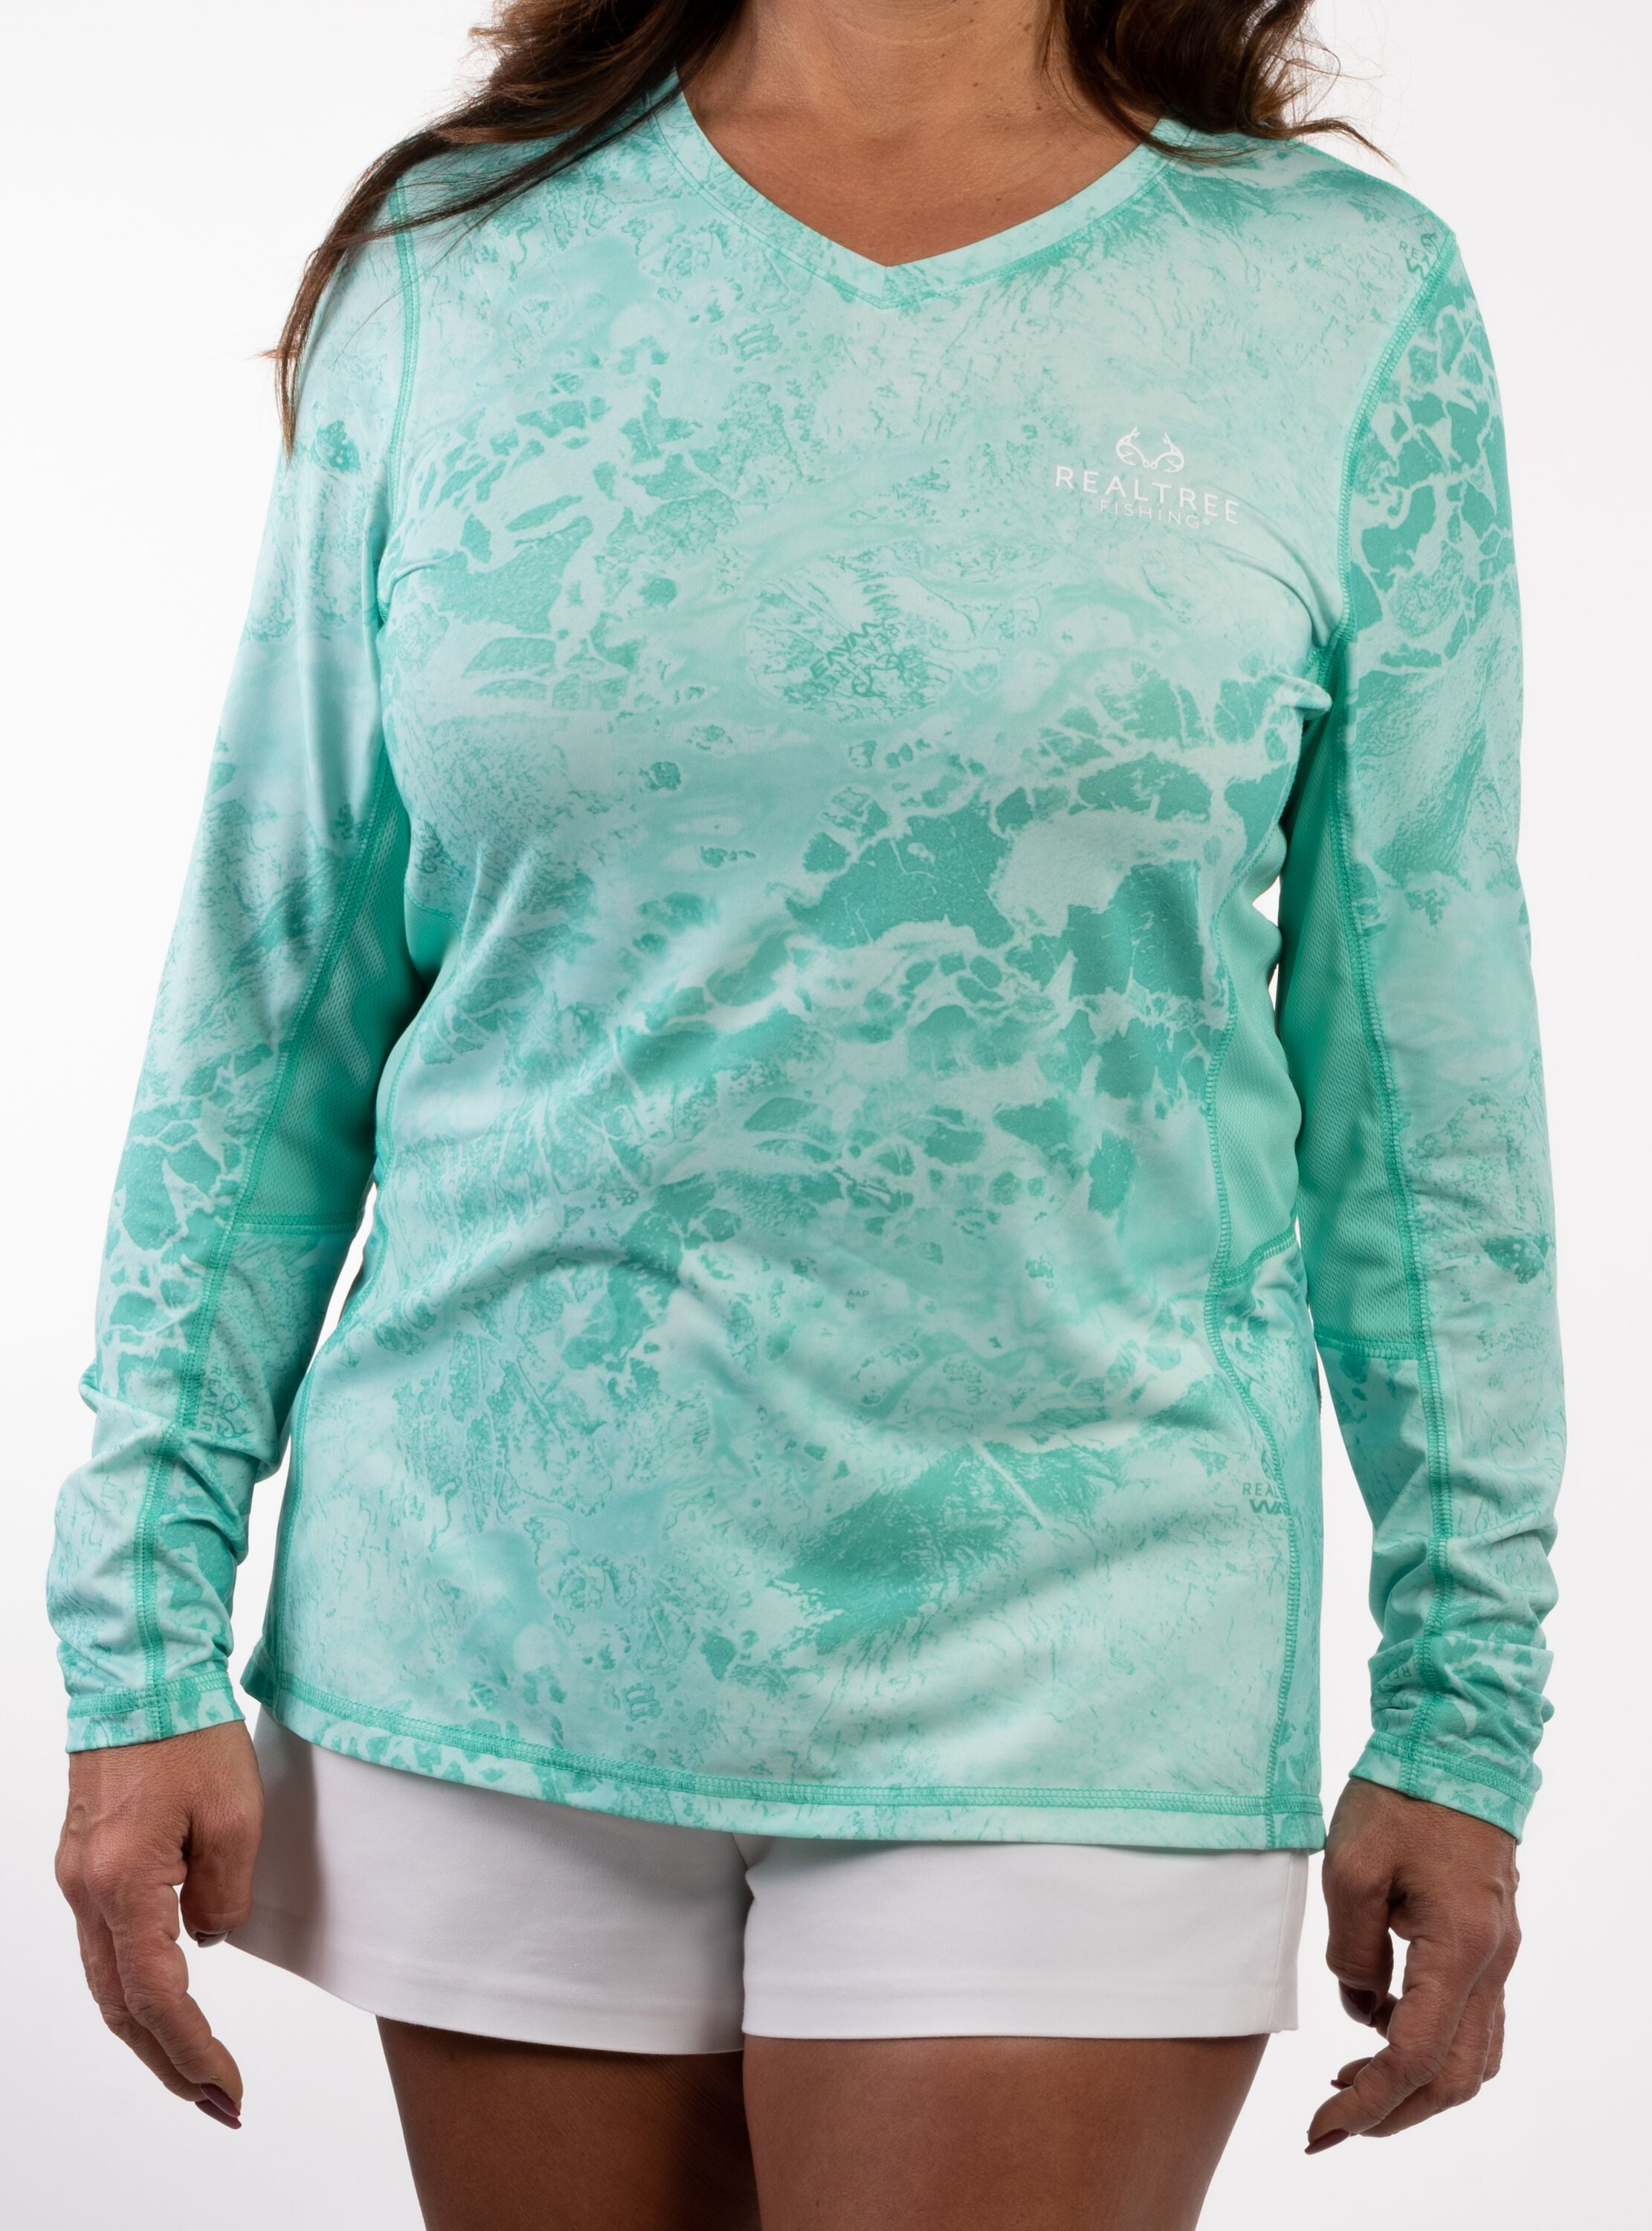 magellan women's long sleeve fishing shirts for Sale,Up To OFF 75%